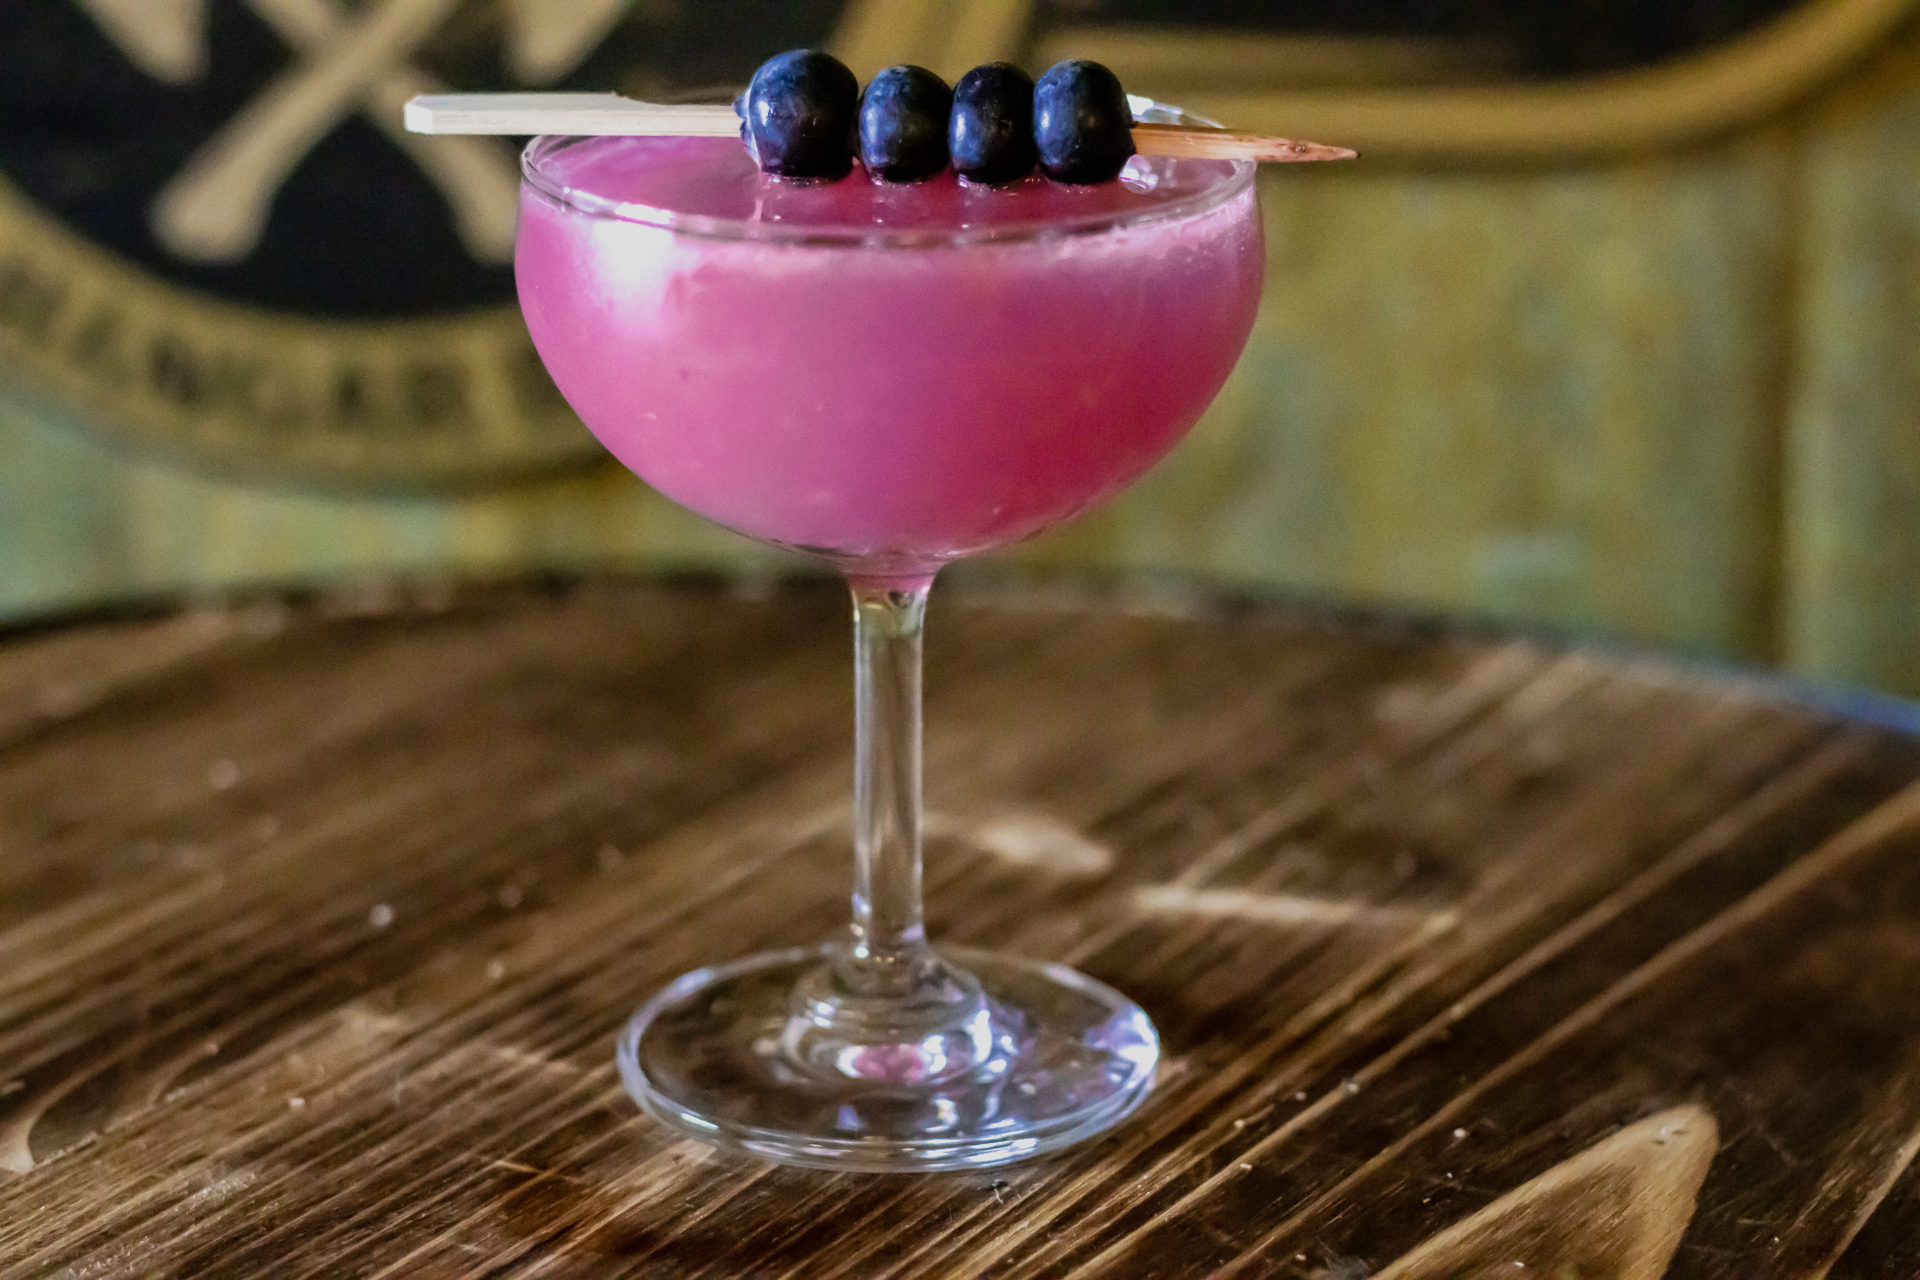 Blueberry Gimlet served at the axe throwing ann arbor.